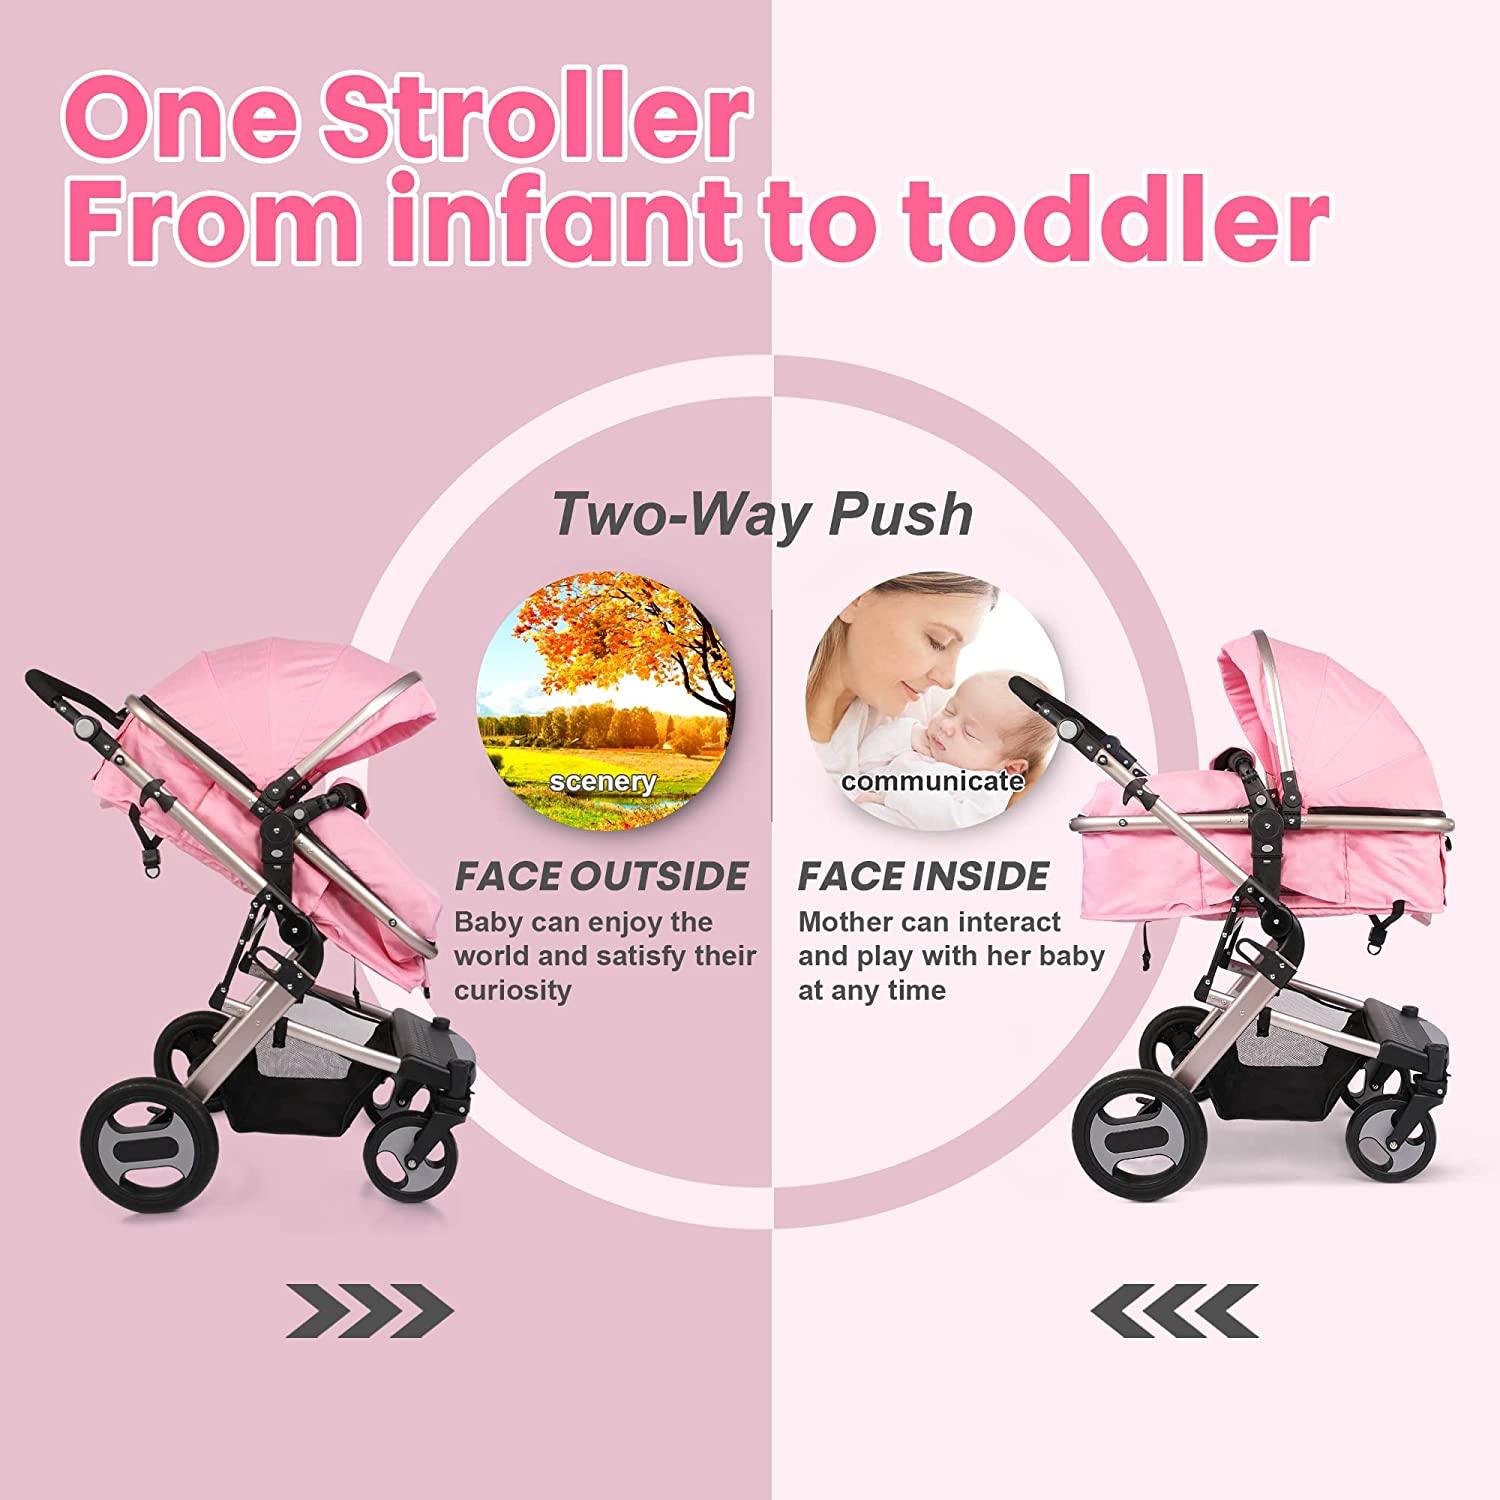 2 in 1 Convertible Baby Stroller for Newborn, Toddler - High Landscape Infant Carriage, Foldable Aluminum Alloy Pushchair, Pink - Bosonshop